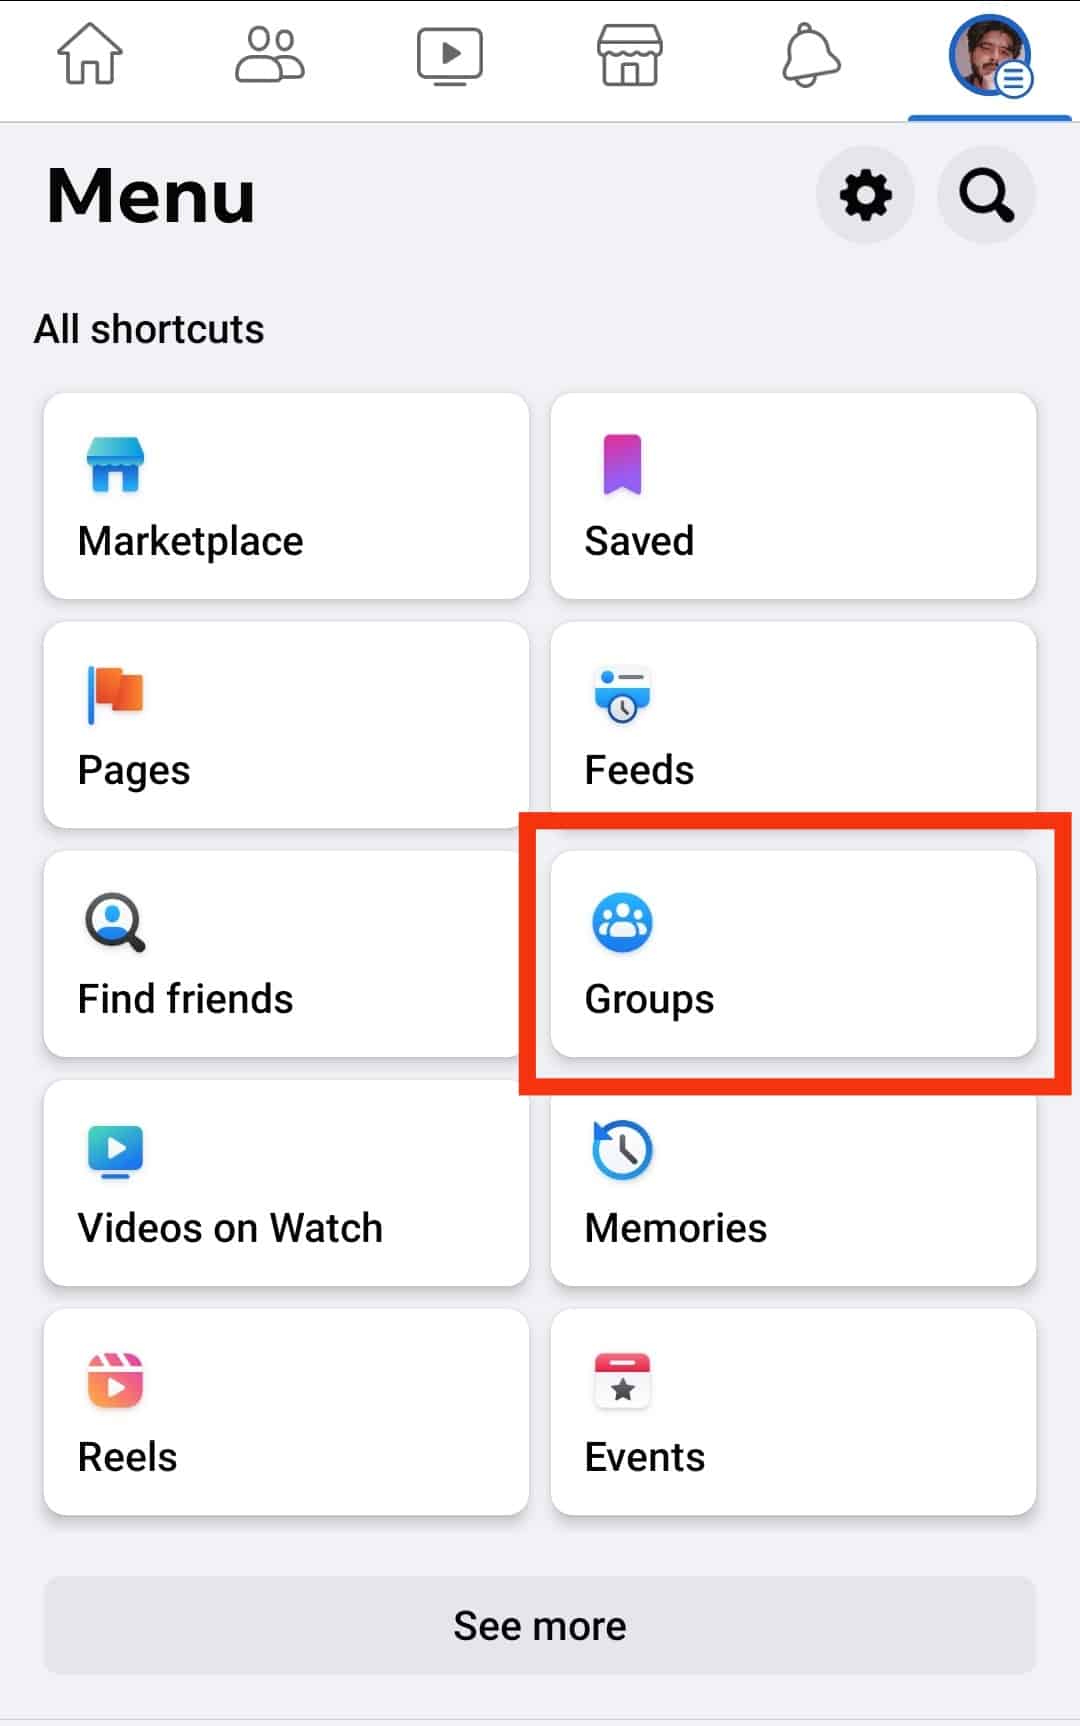 Click The Groups Option